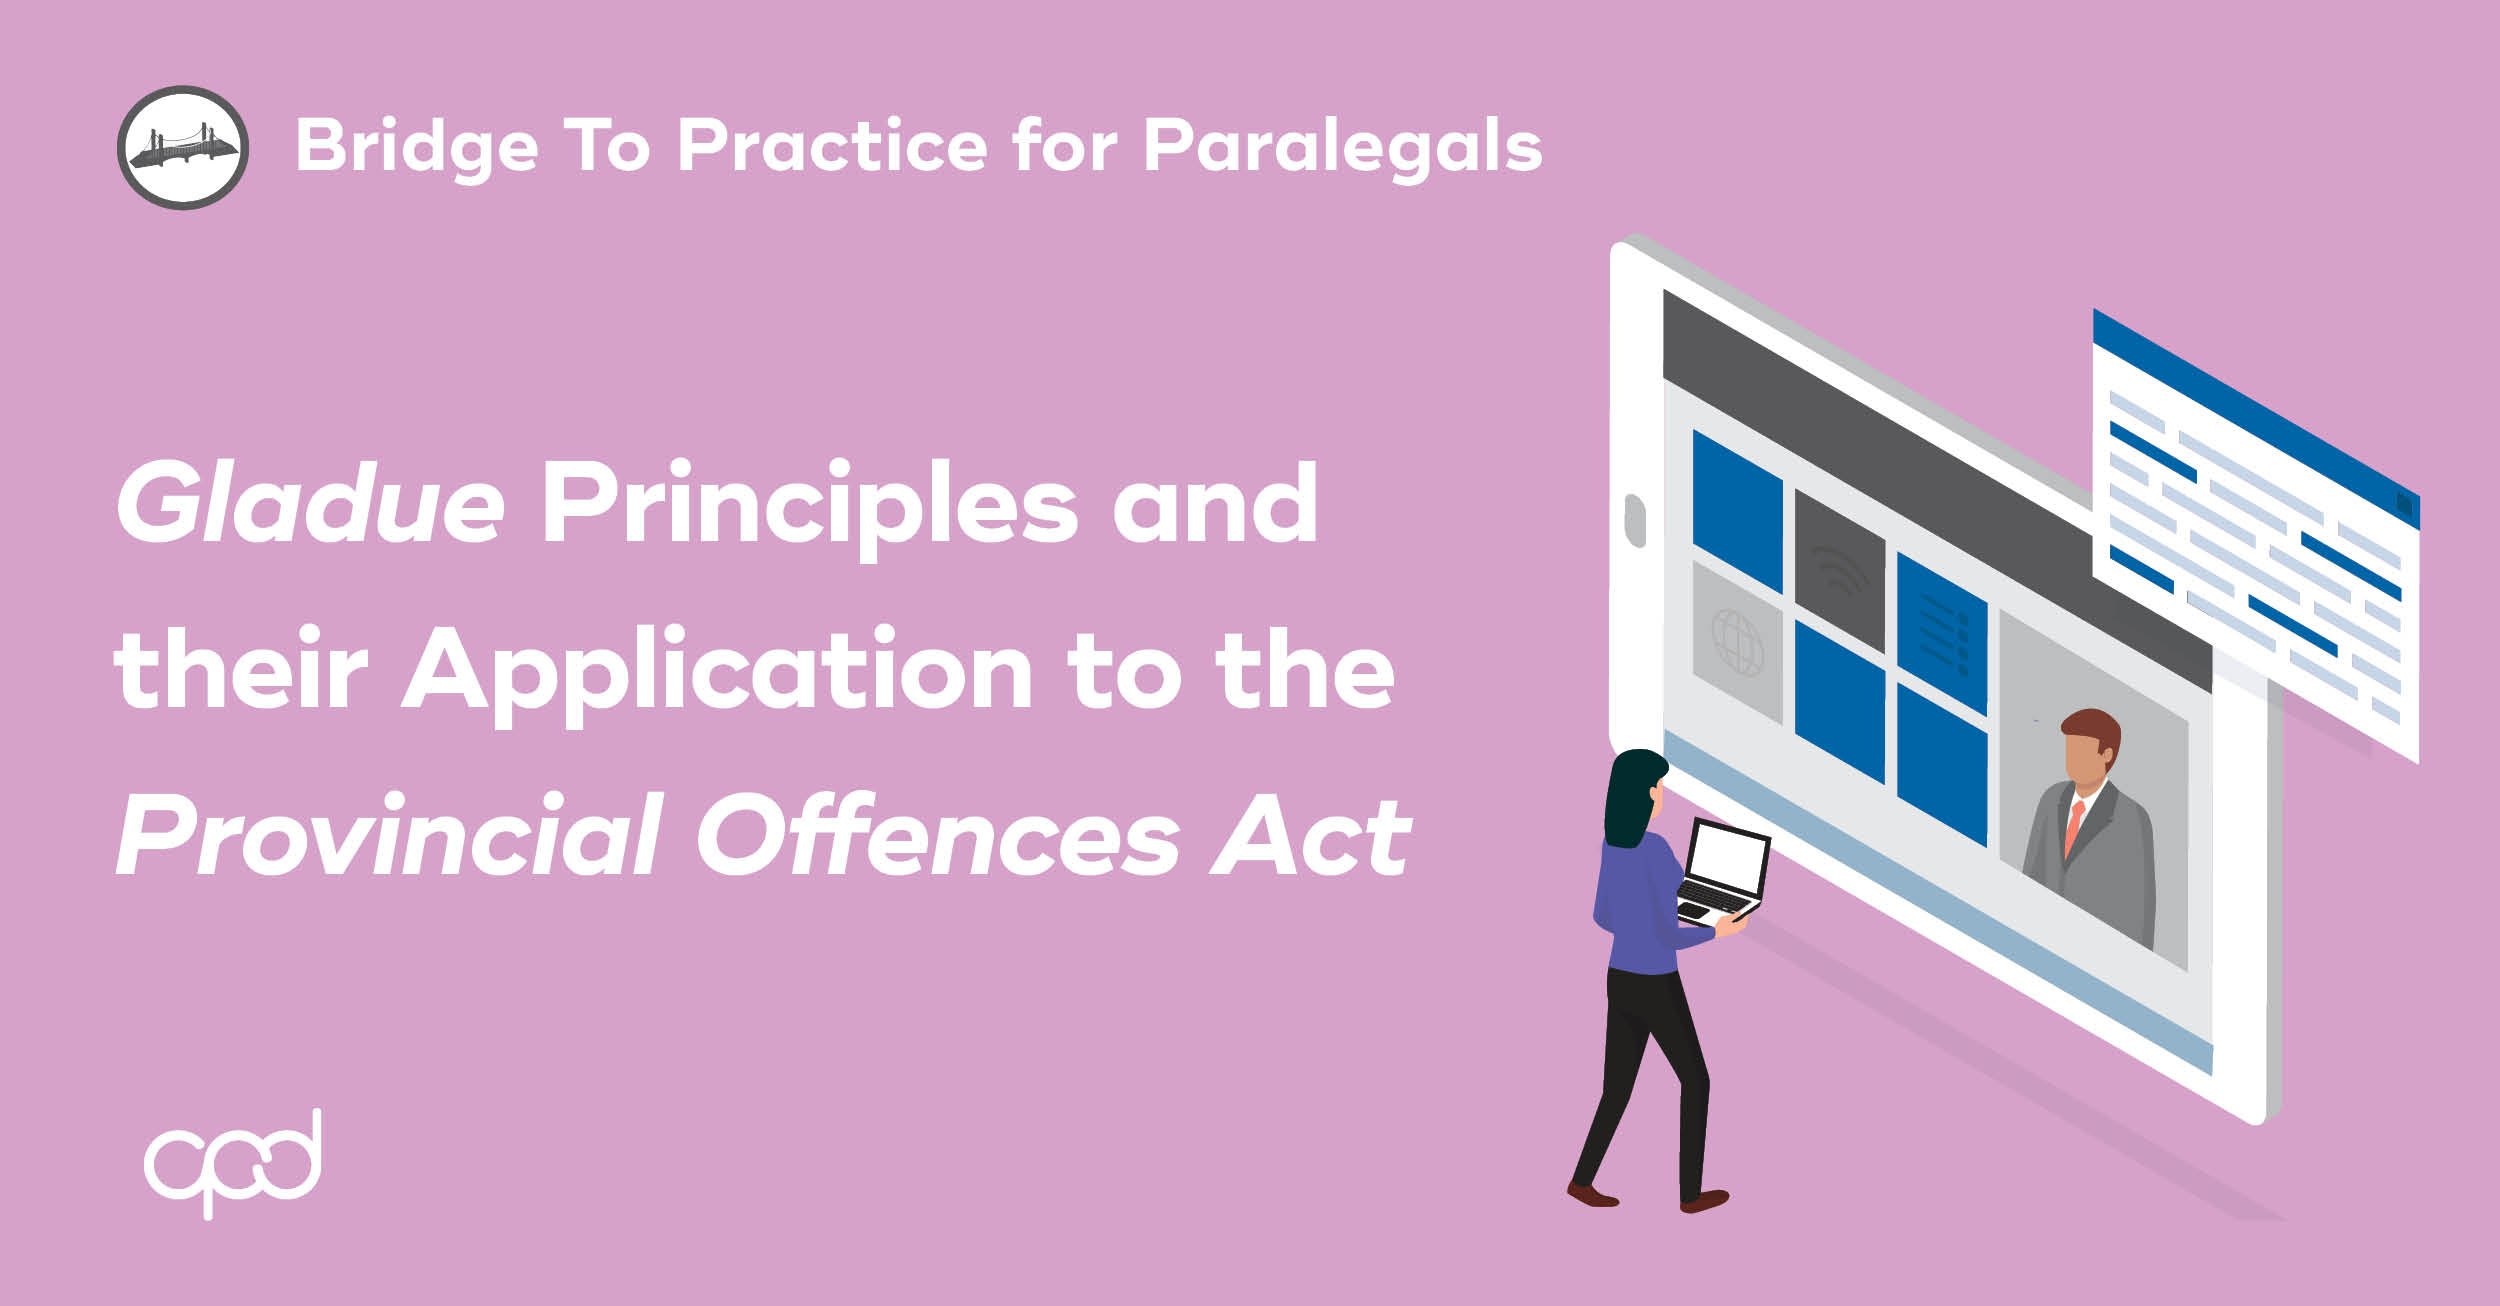 Gladue Principles and their Application to the Provincial Offences Act